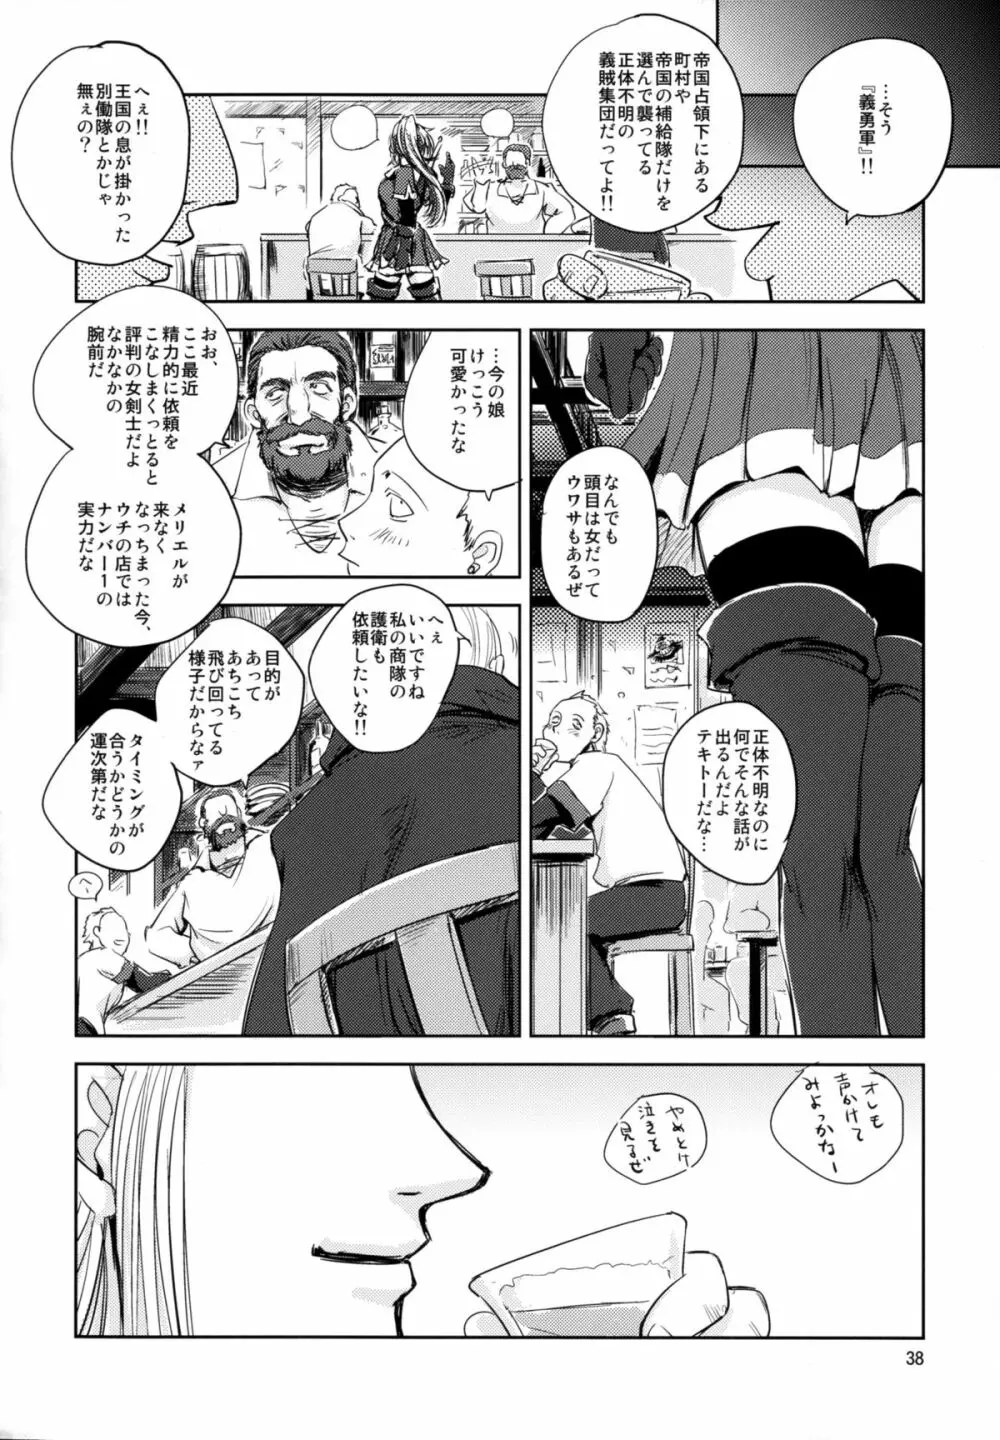 GRASSEN'S WAR ANOTHER STORY Ex #05 ノード侵攻 V Page.38